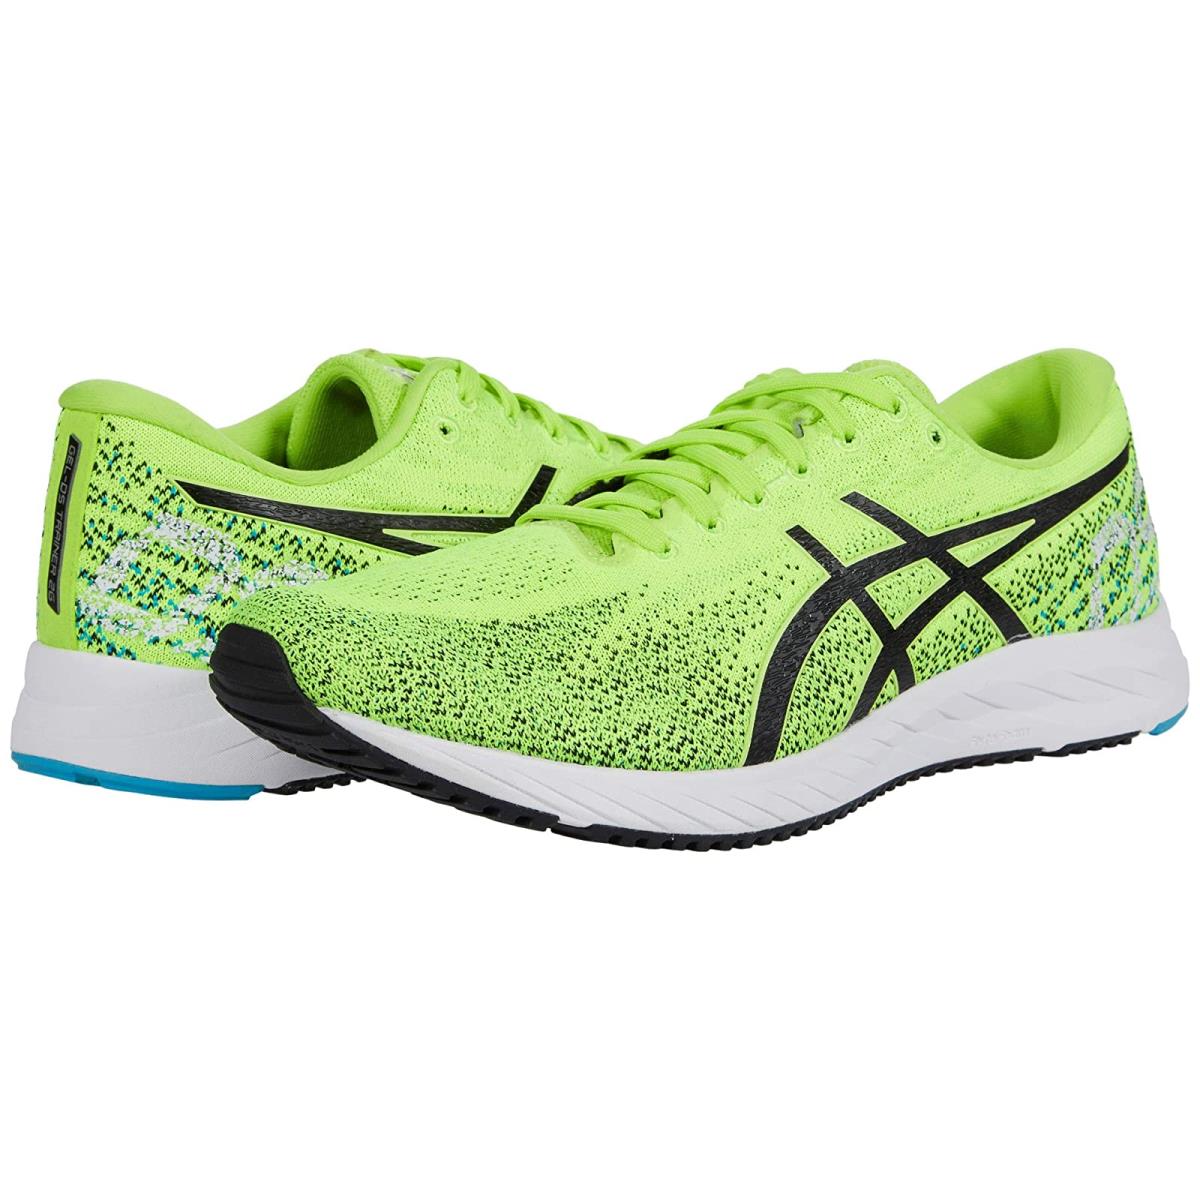 Man`s Sneakers Athletic Shoes Asics Gel-ds Trainer 26 Hazard Green/Black